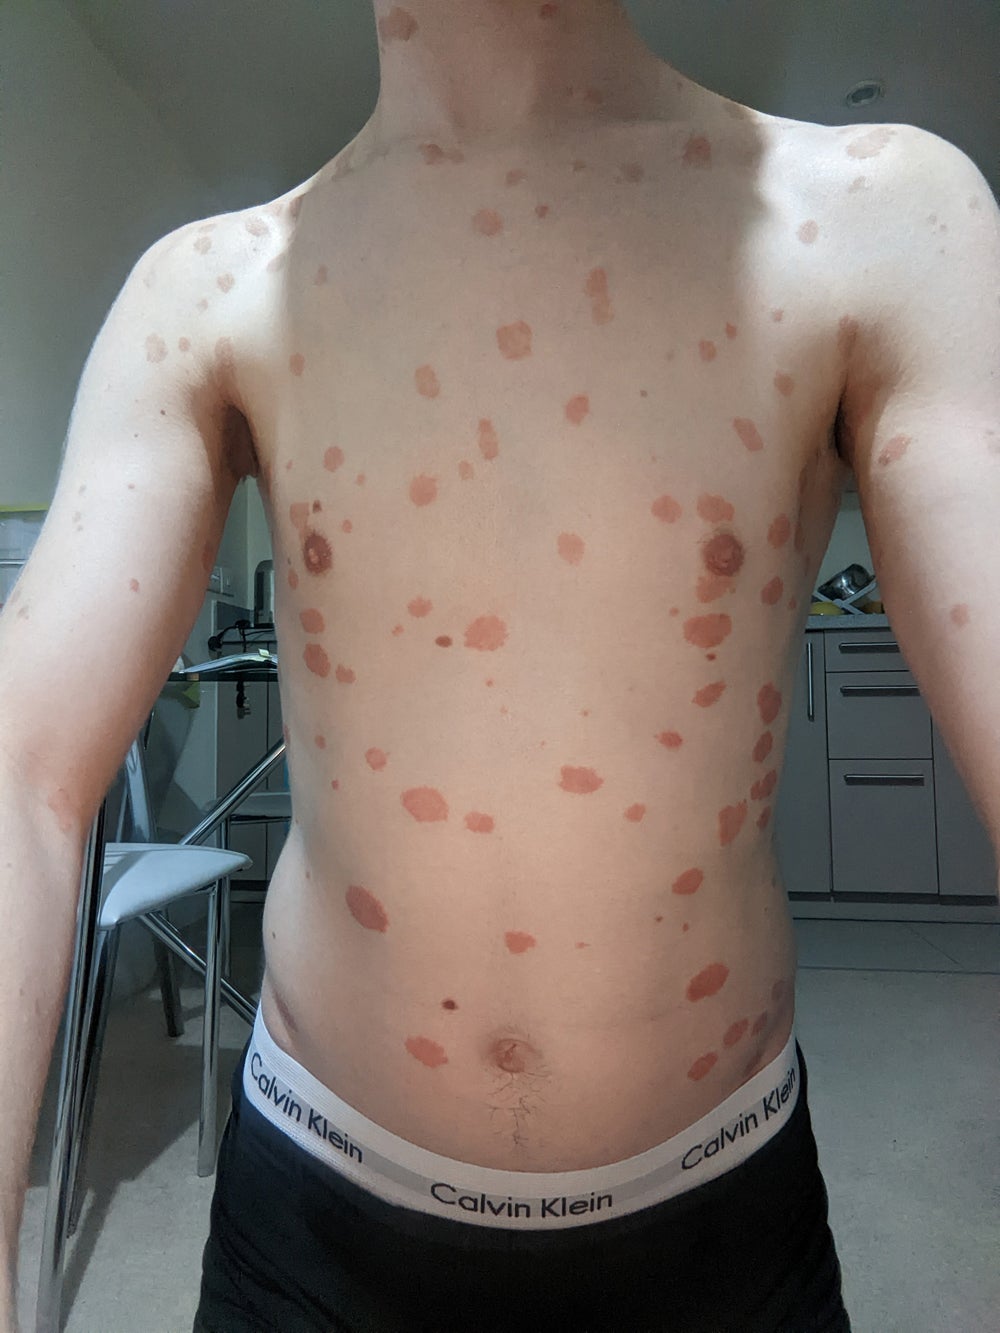 Scot Cunningham, 27, had psoriasis covering his whole body (Collect/PA Real Life)